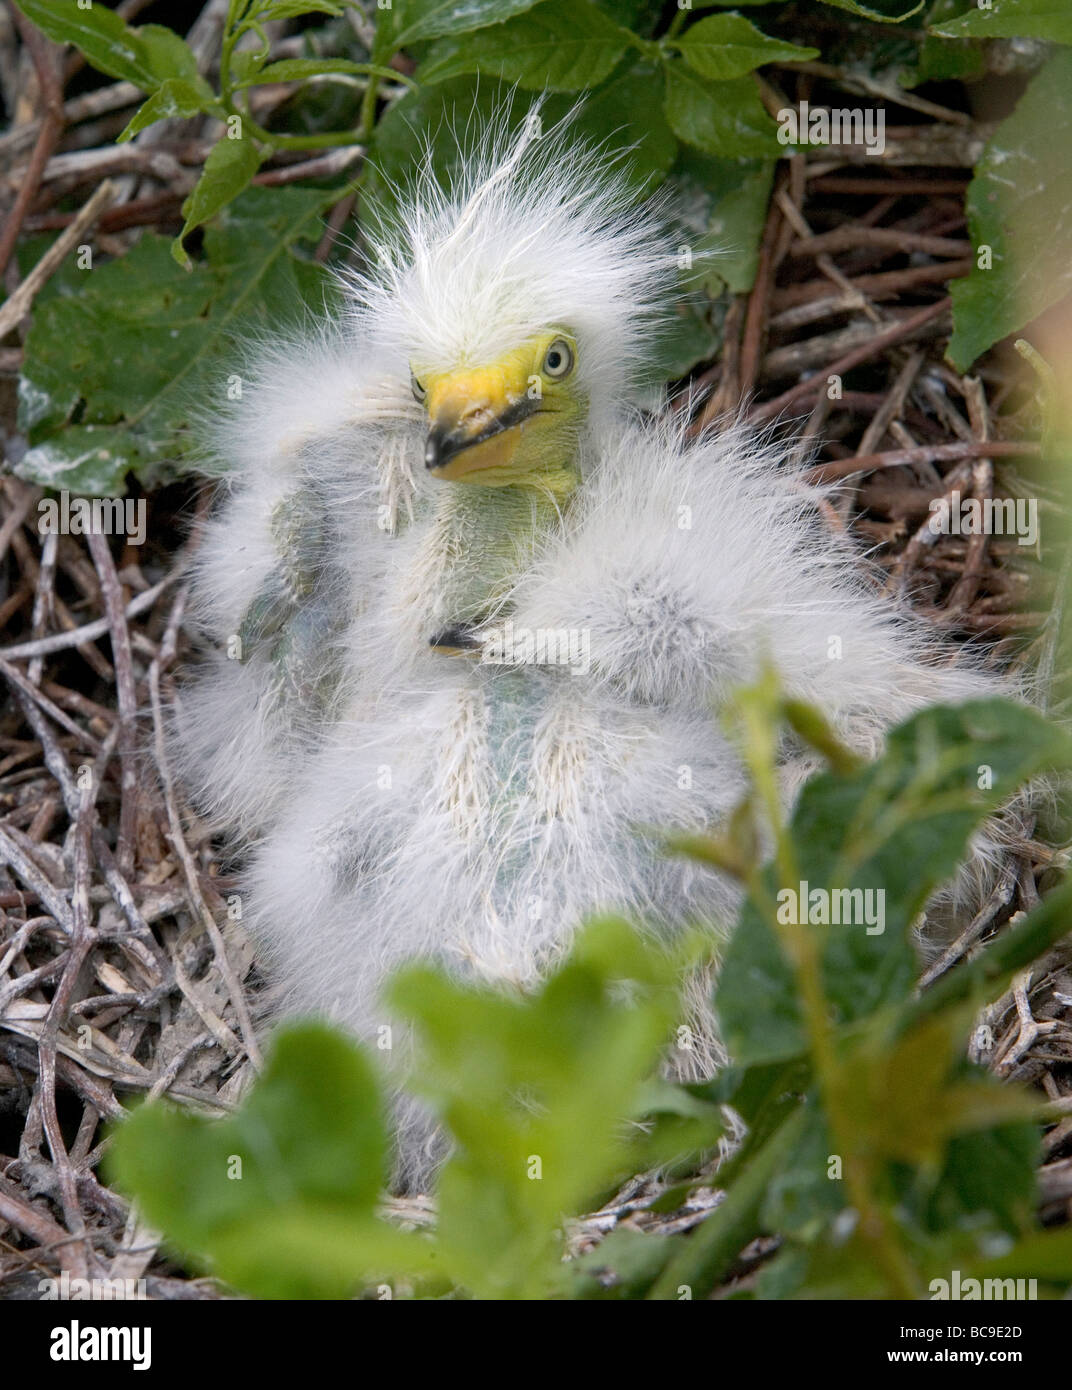 3 Great egret chicks in the nest Stock Photo